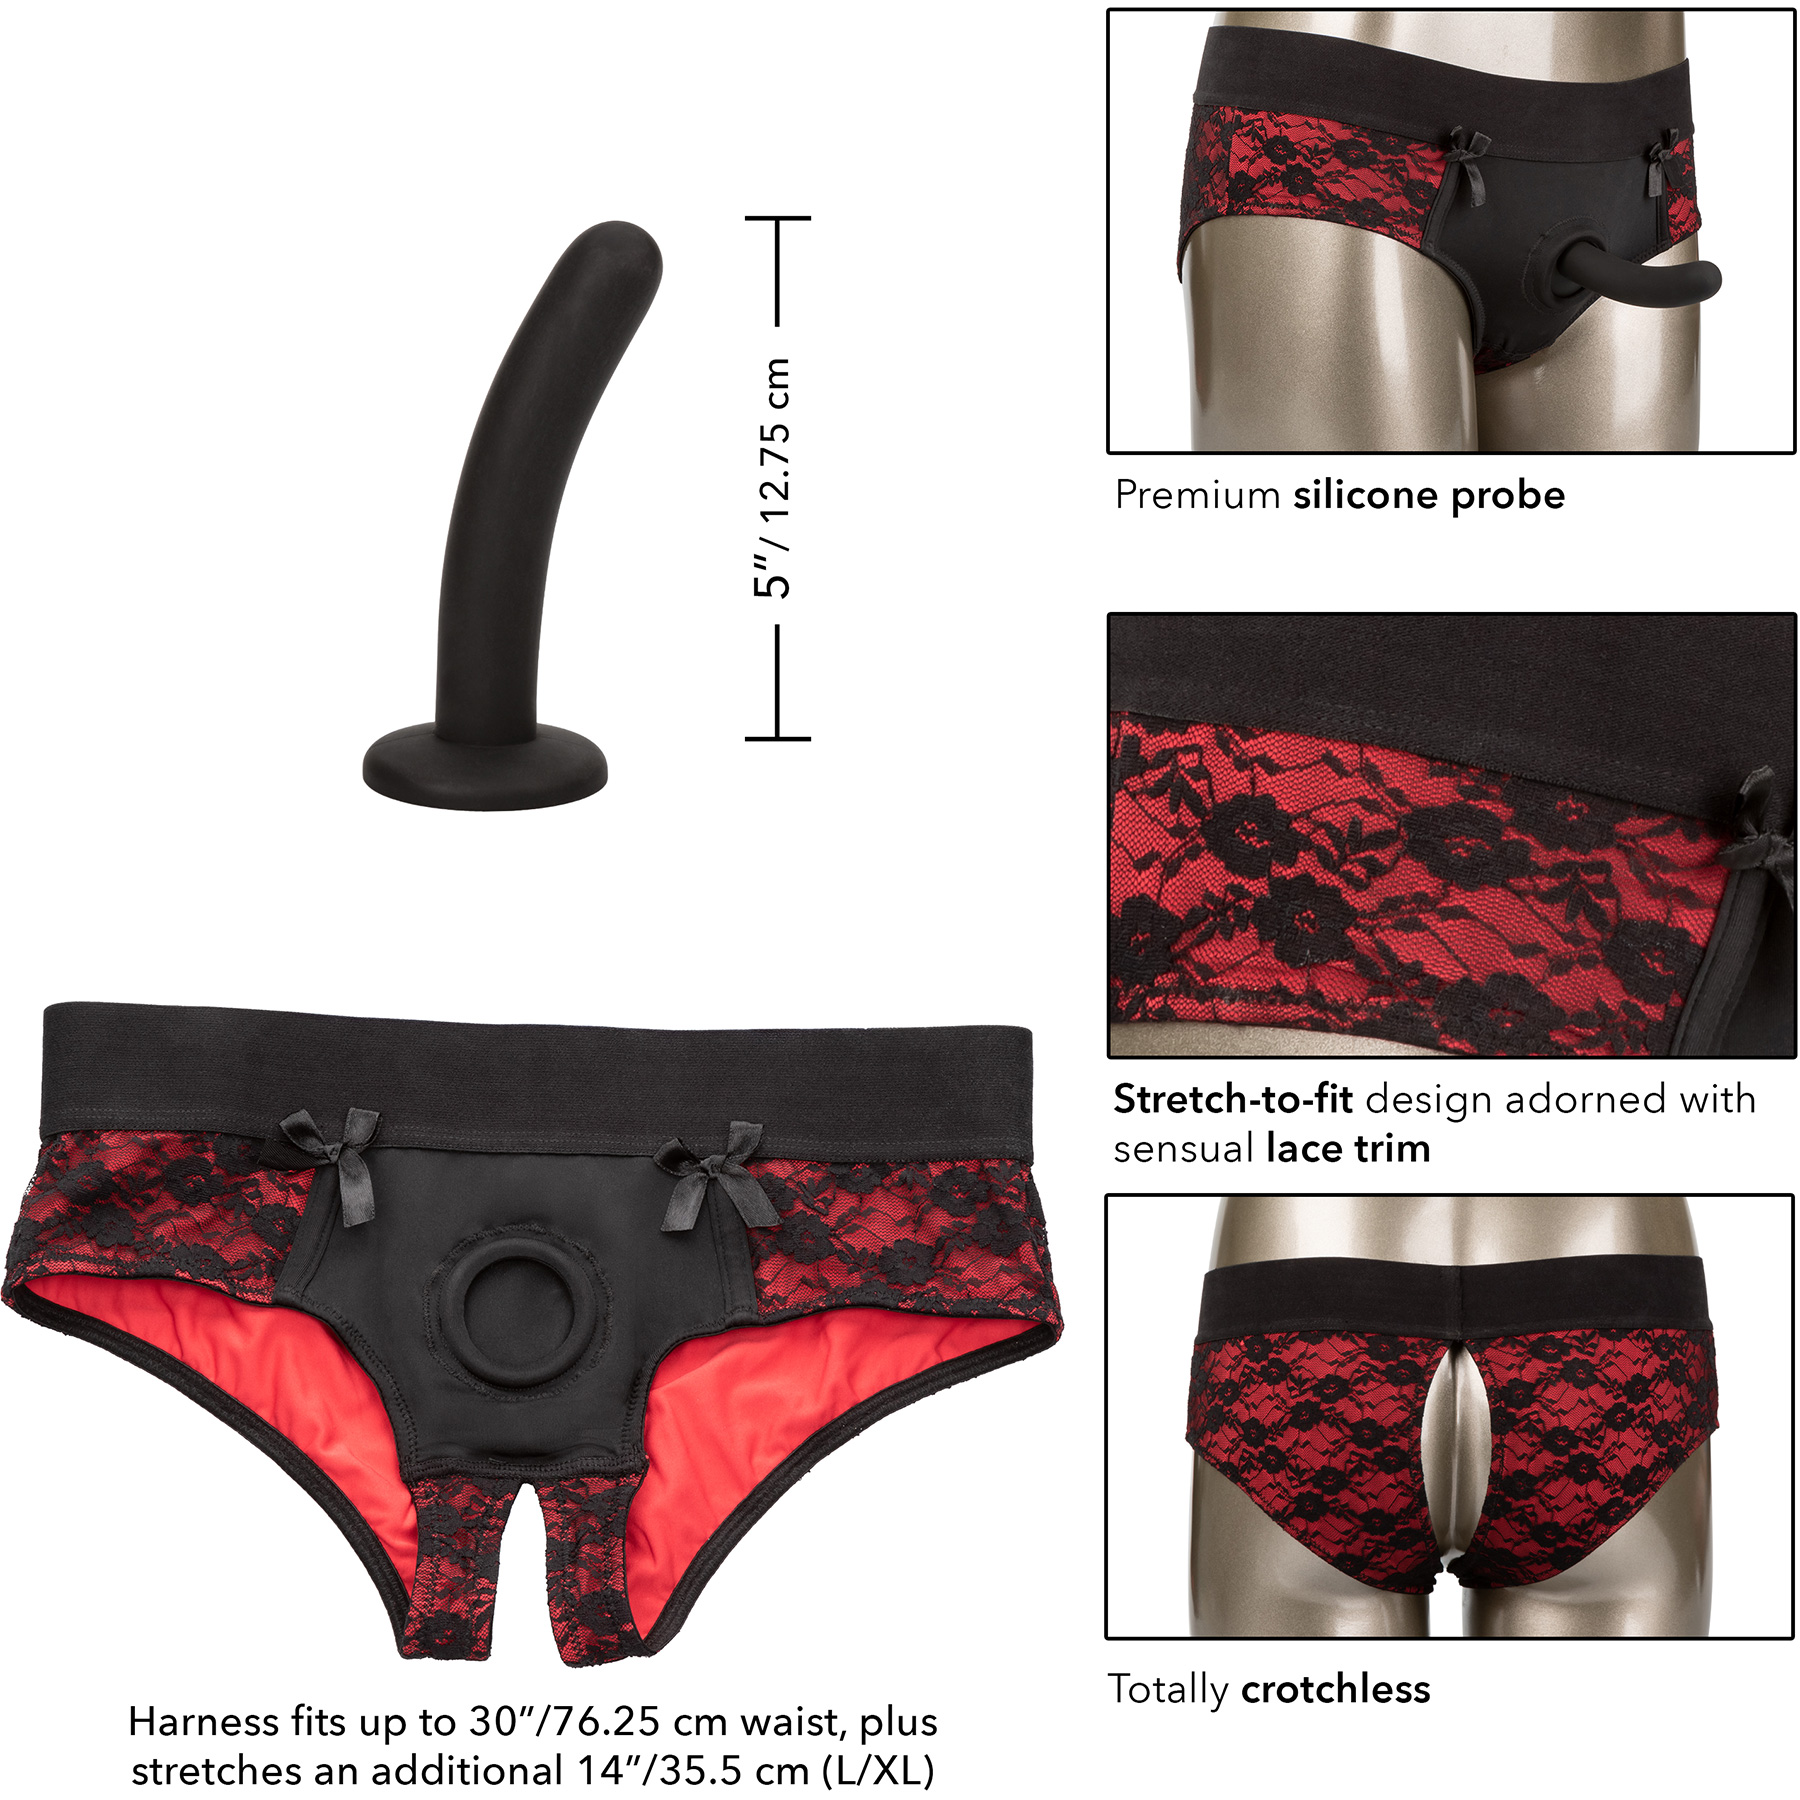 Scandal Crotchless Pegging Panty Set With Silicone Probe - Measurements